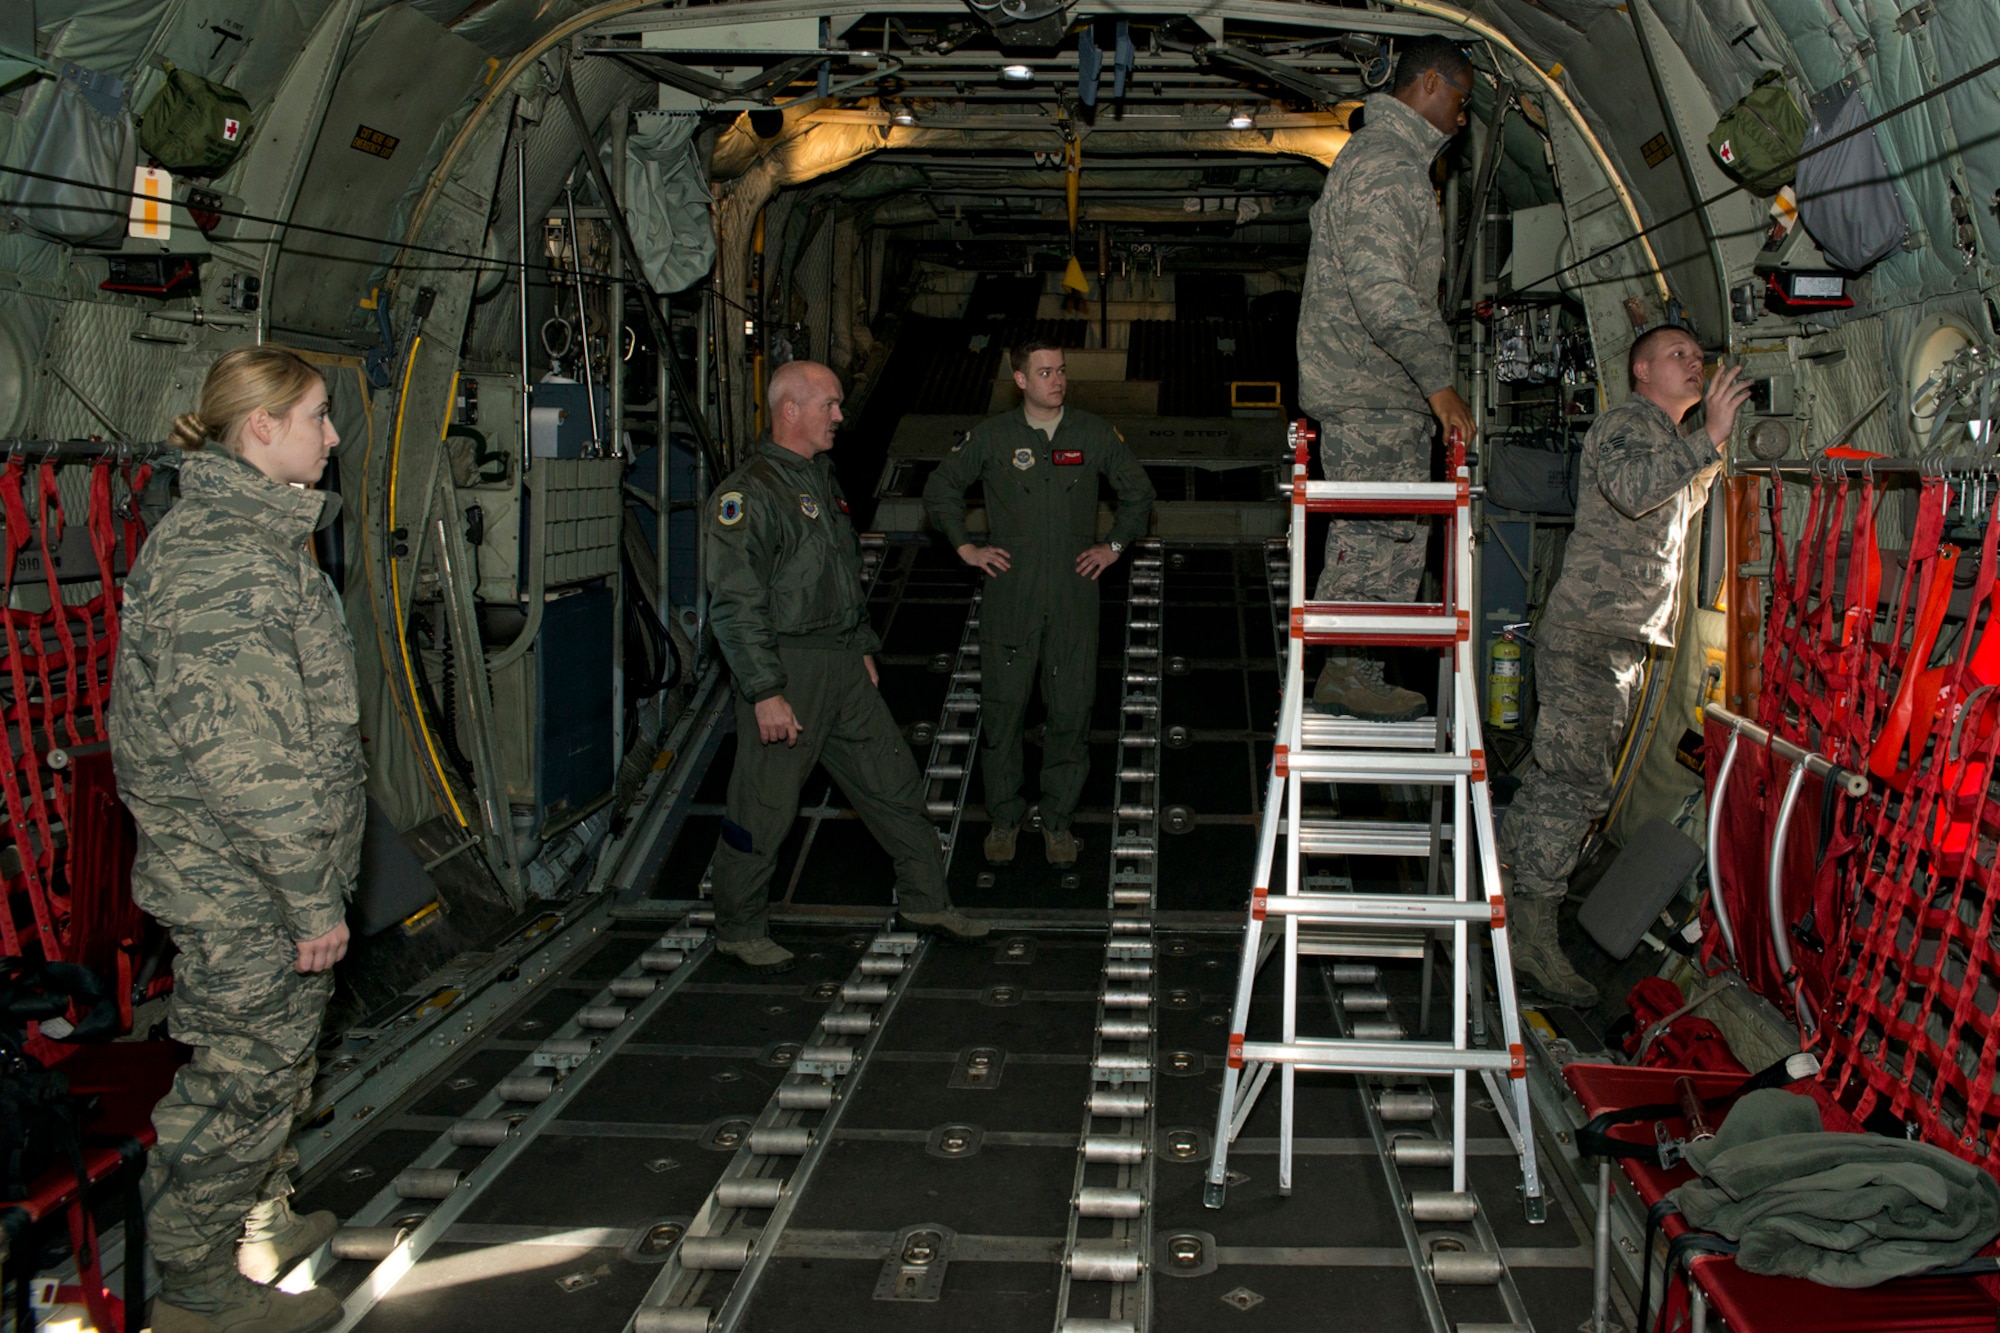 U.S. Air Force Reserve Airmen assigned to the 913th Maintenance Squadron work on a C-130H before its final training mission flight at Little Rock Air Force Base, Ark., Jan. 28, 2016. The flight marks the official change of mission from the “H” model to the “J” model for the 913th Airlift Group. (U.S. Air Force photo by Master Sgt. Jeff Walston/Released)